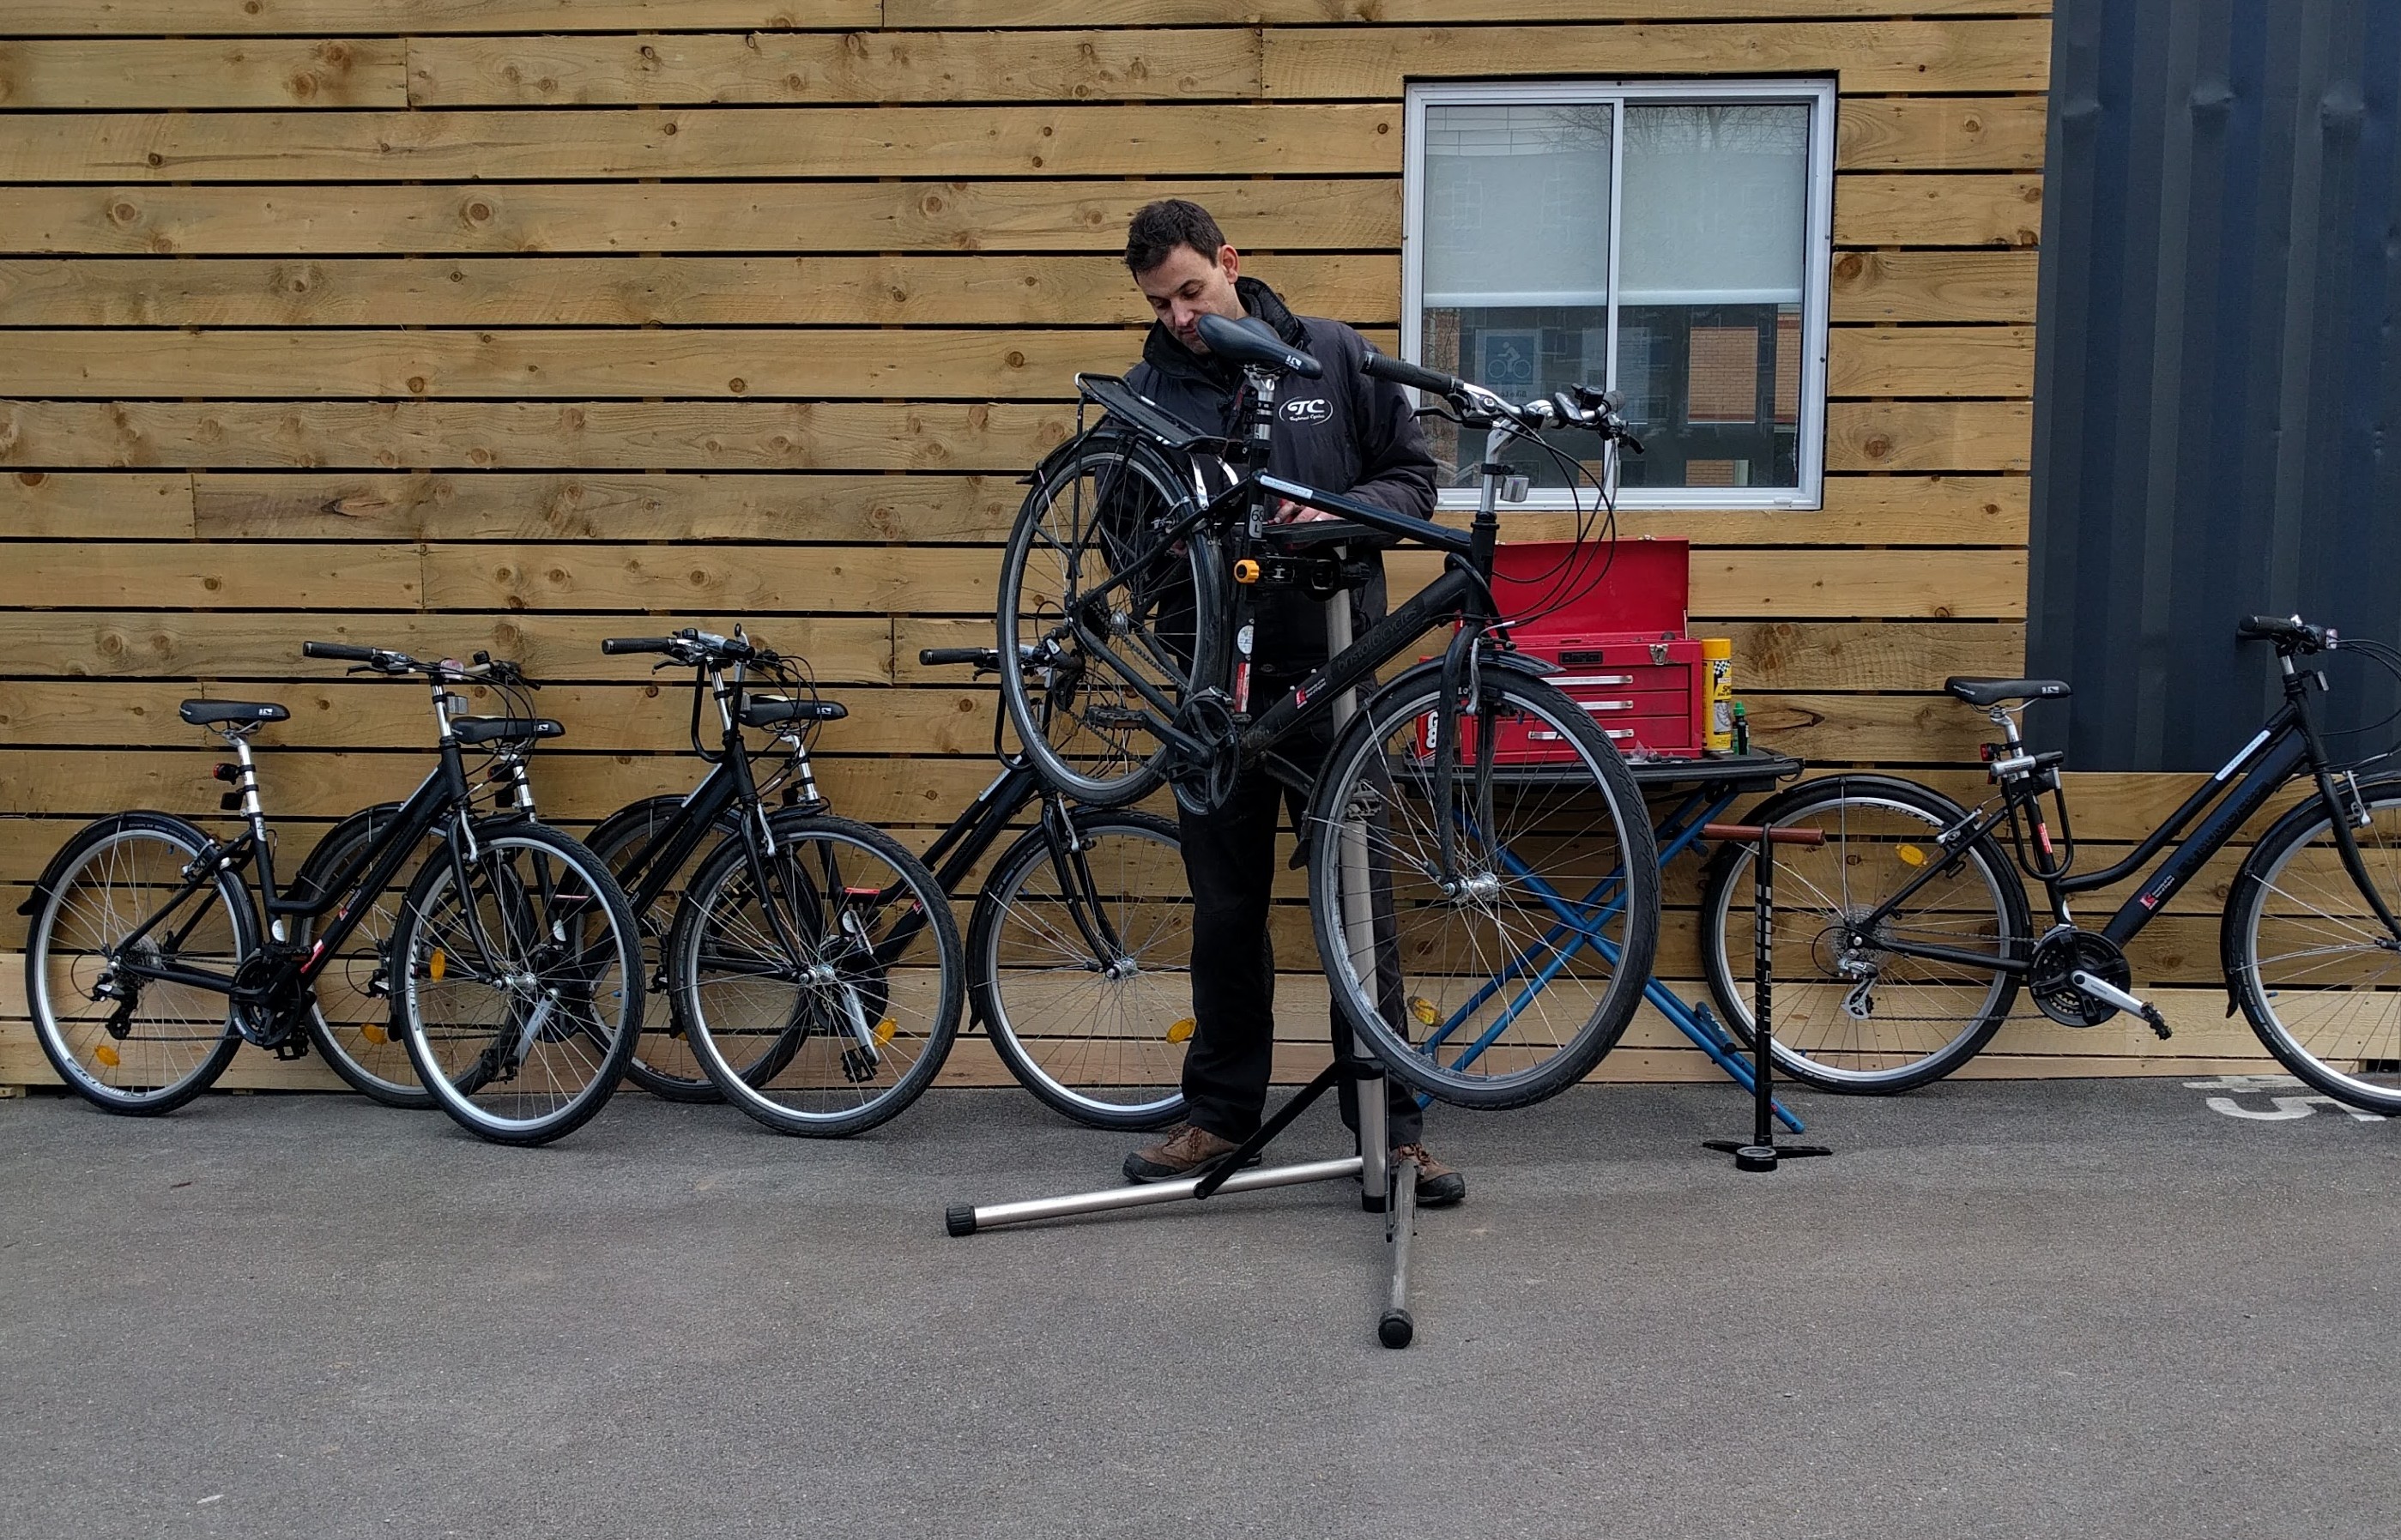 Taylored Cycles can service your fleet of bikes